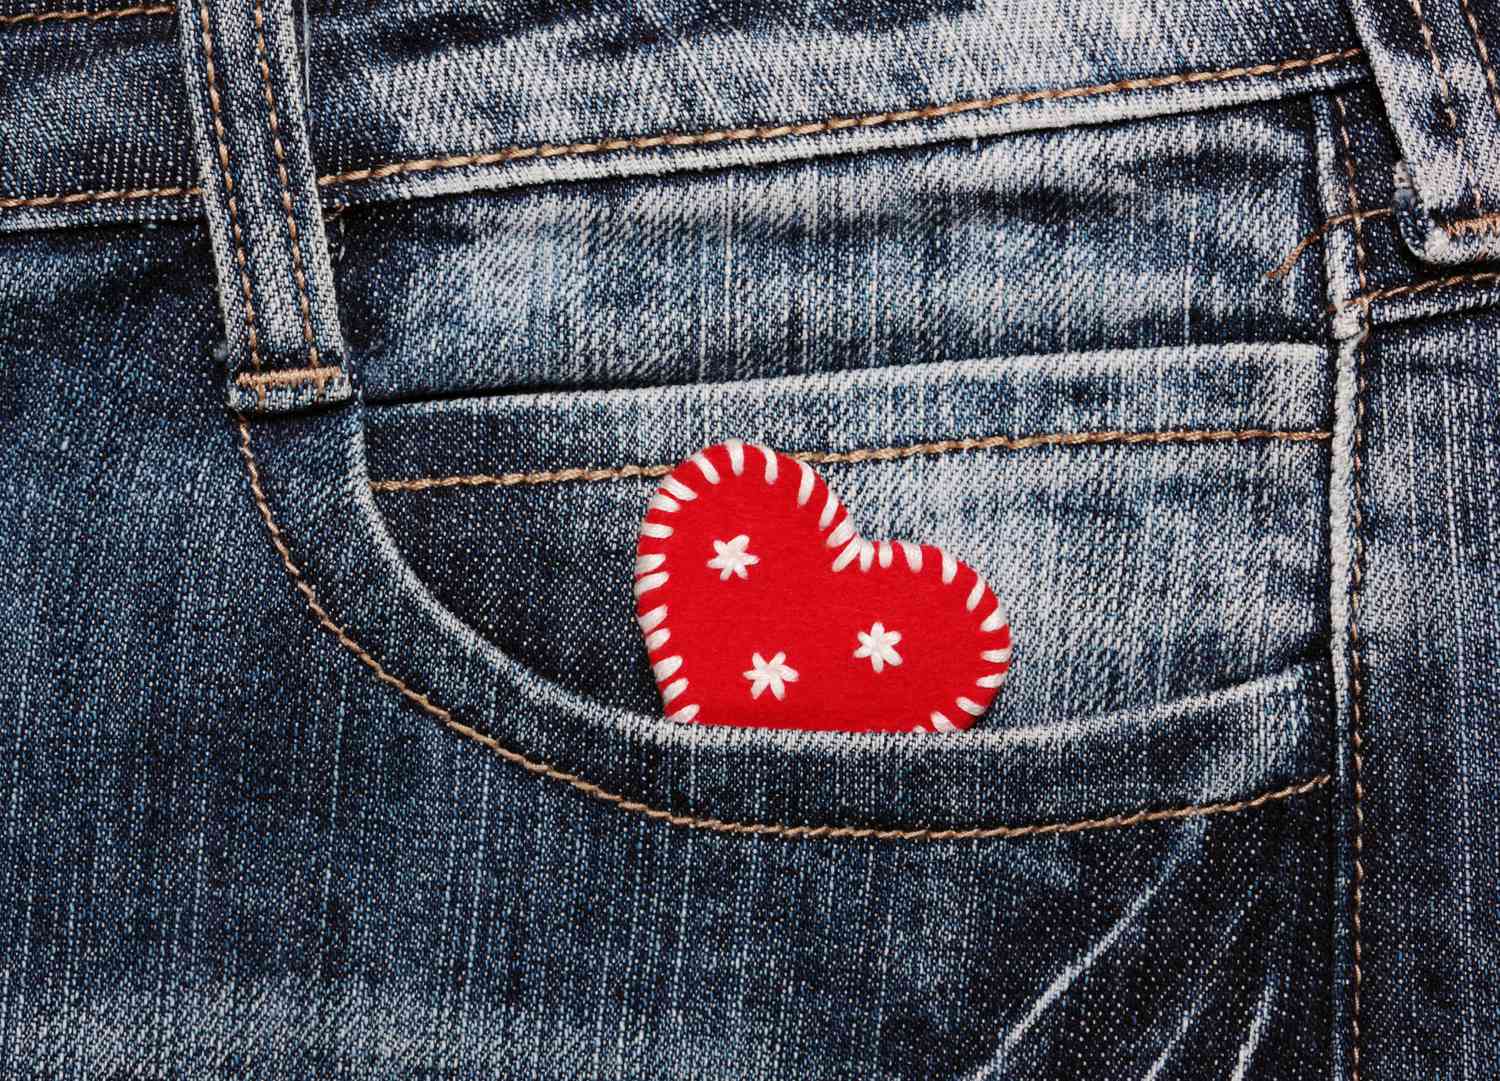 heart with embroidered in jeans pocket